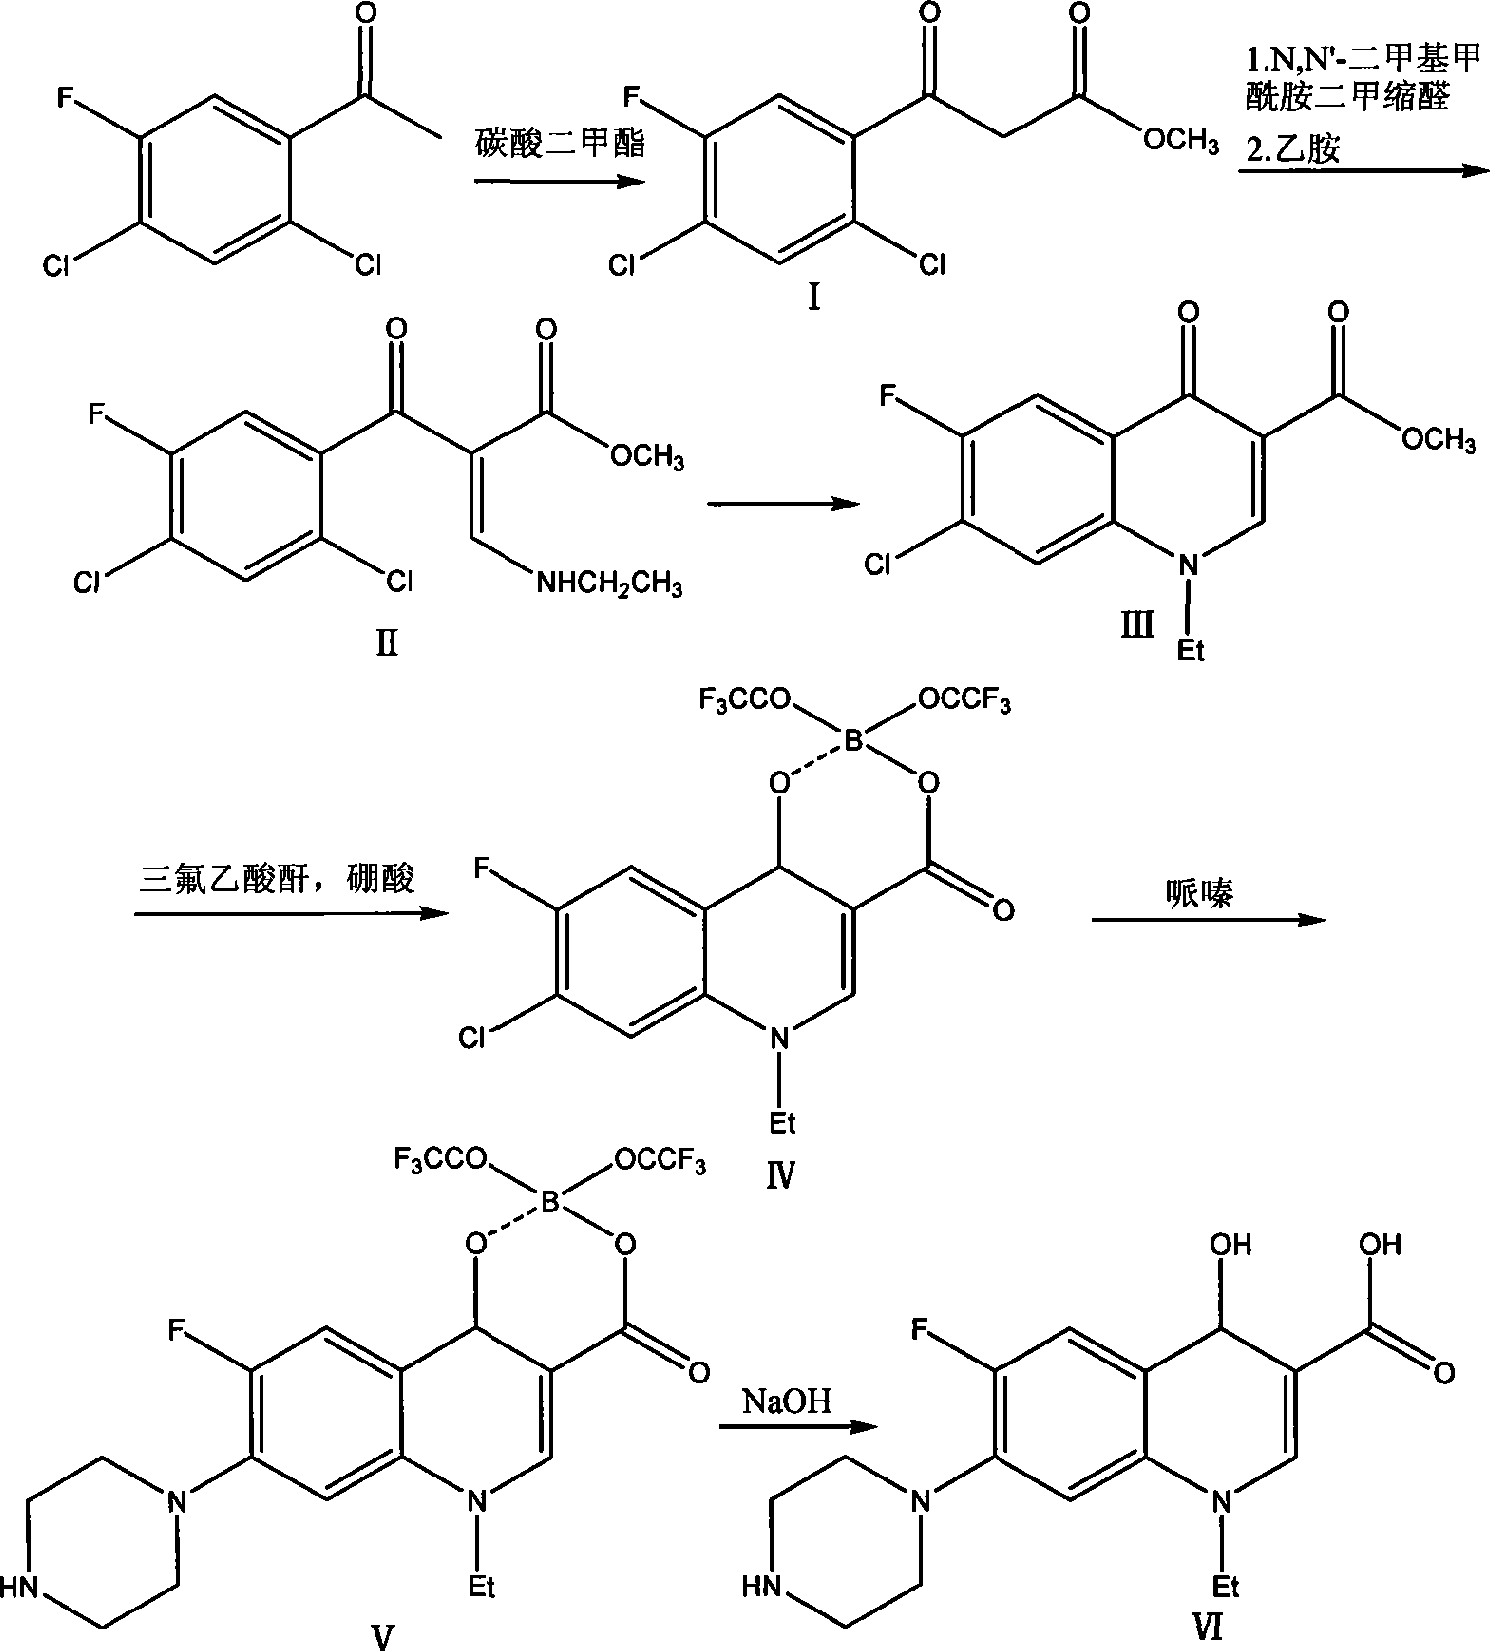 Process for synthesizing norfloxacin